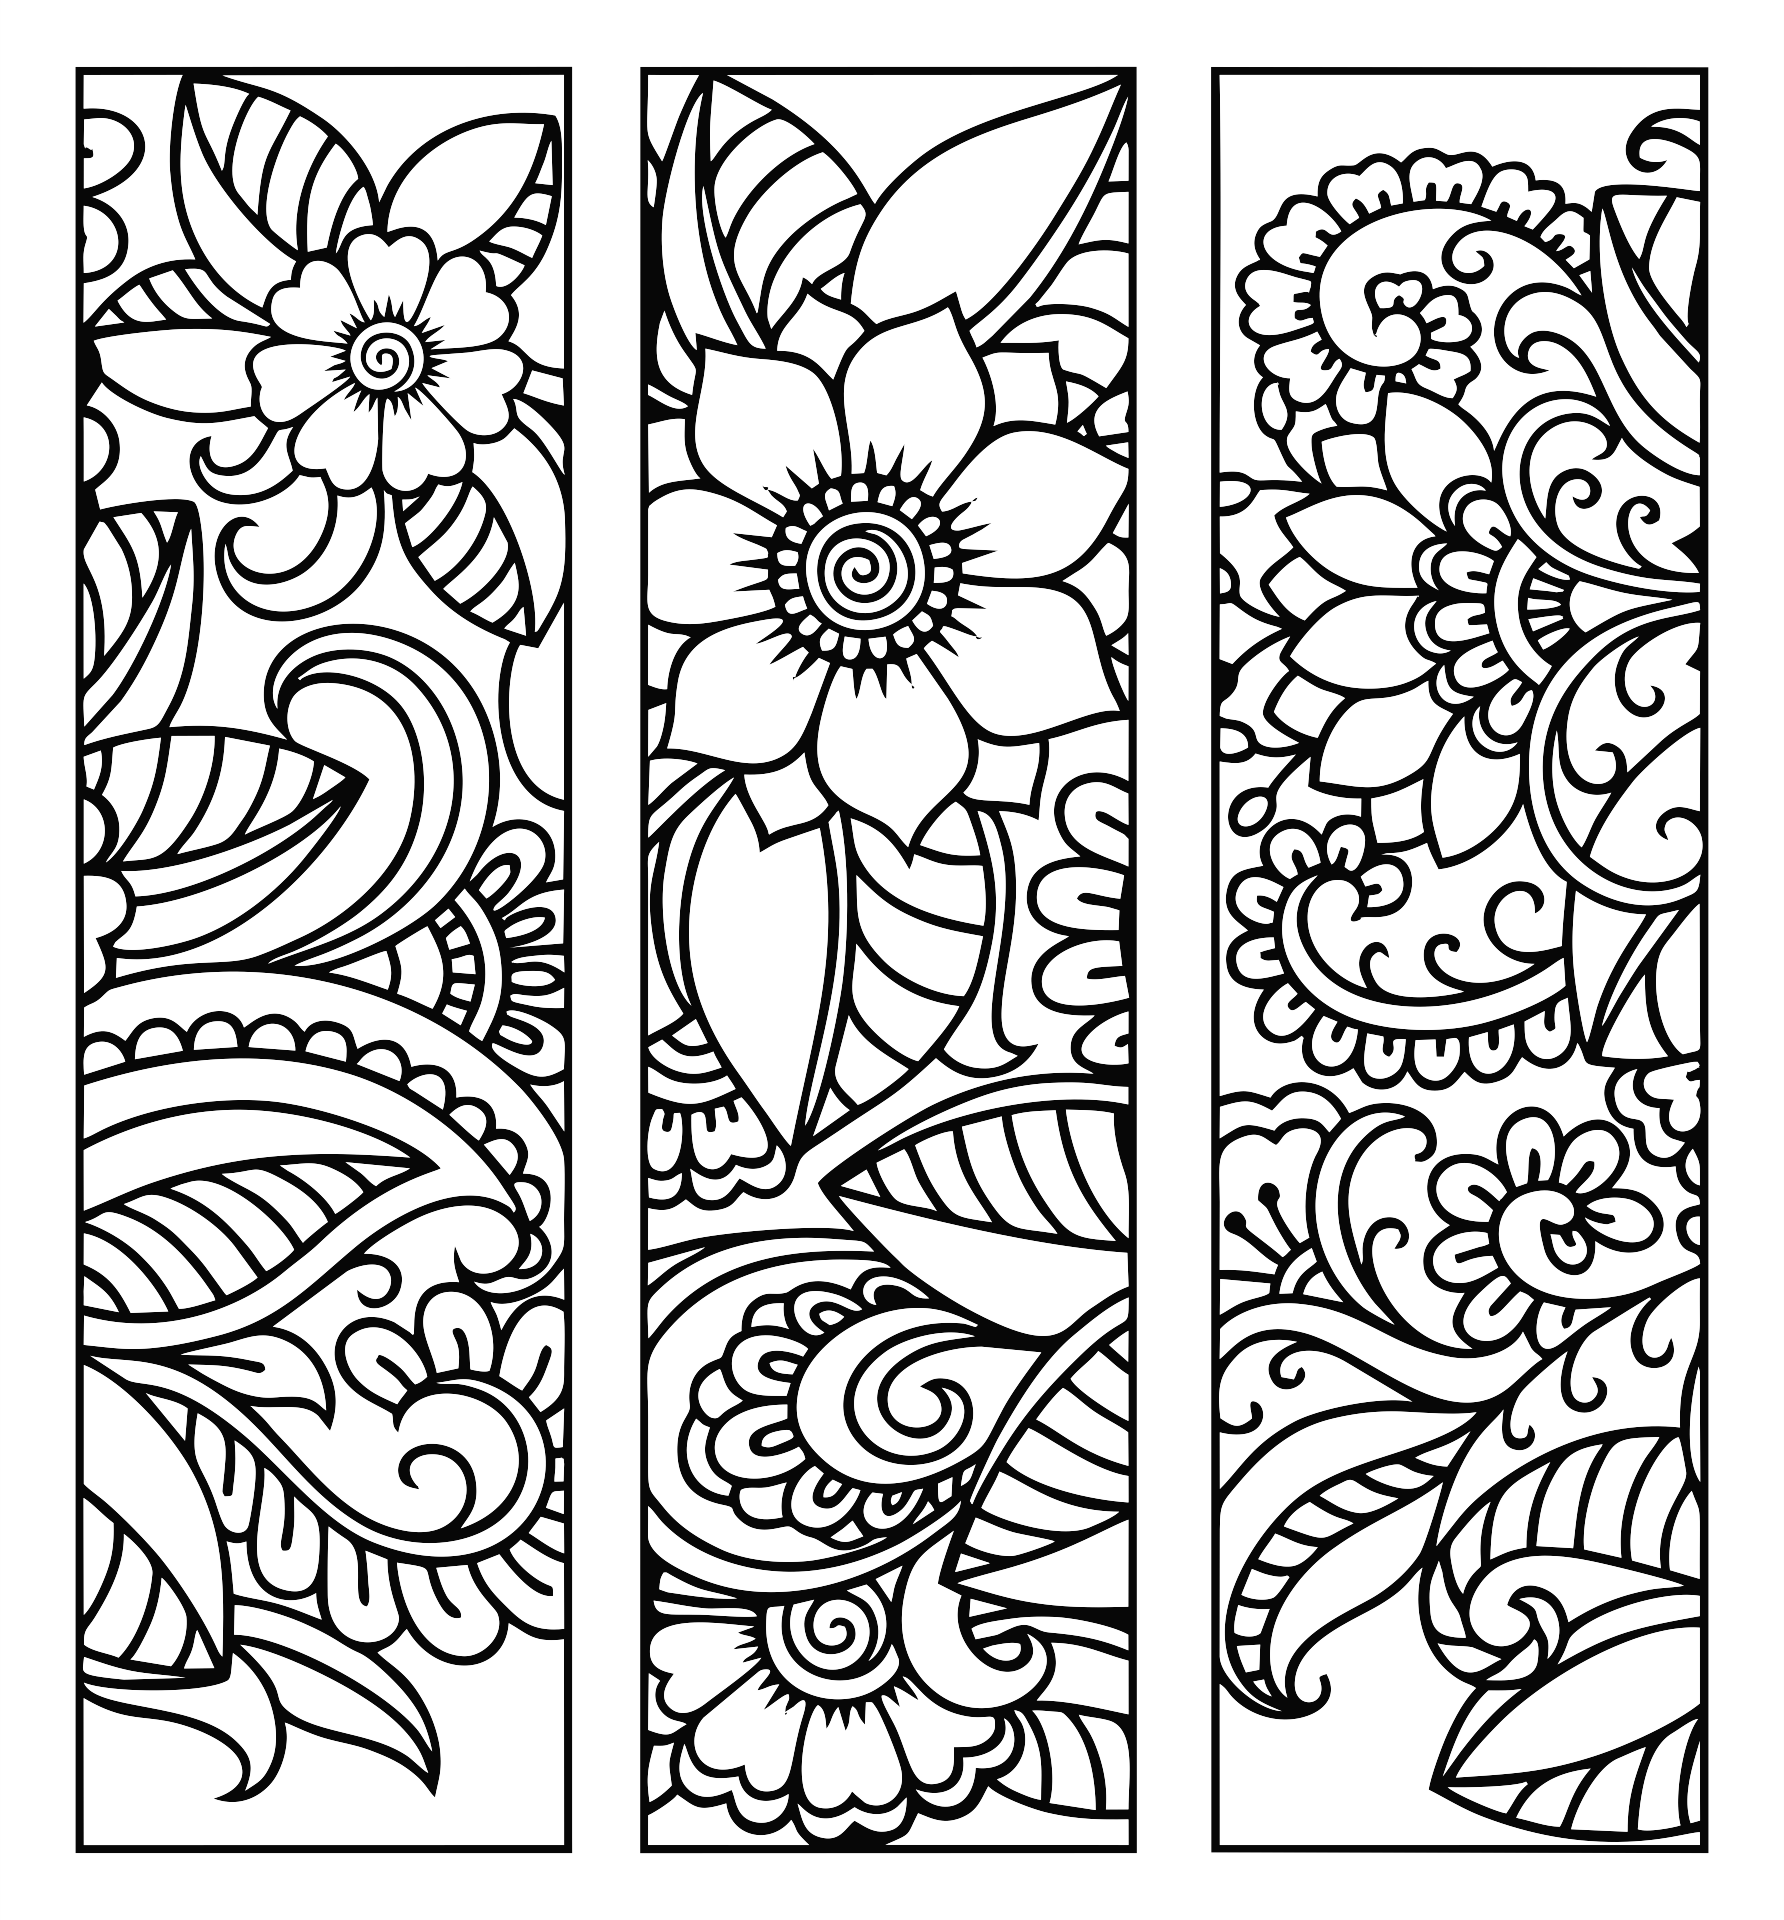 colouring-in-bookmarks-printable